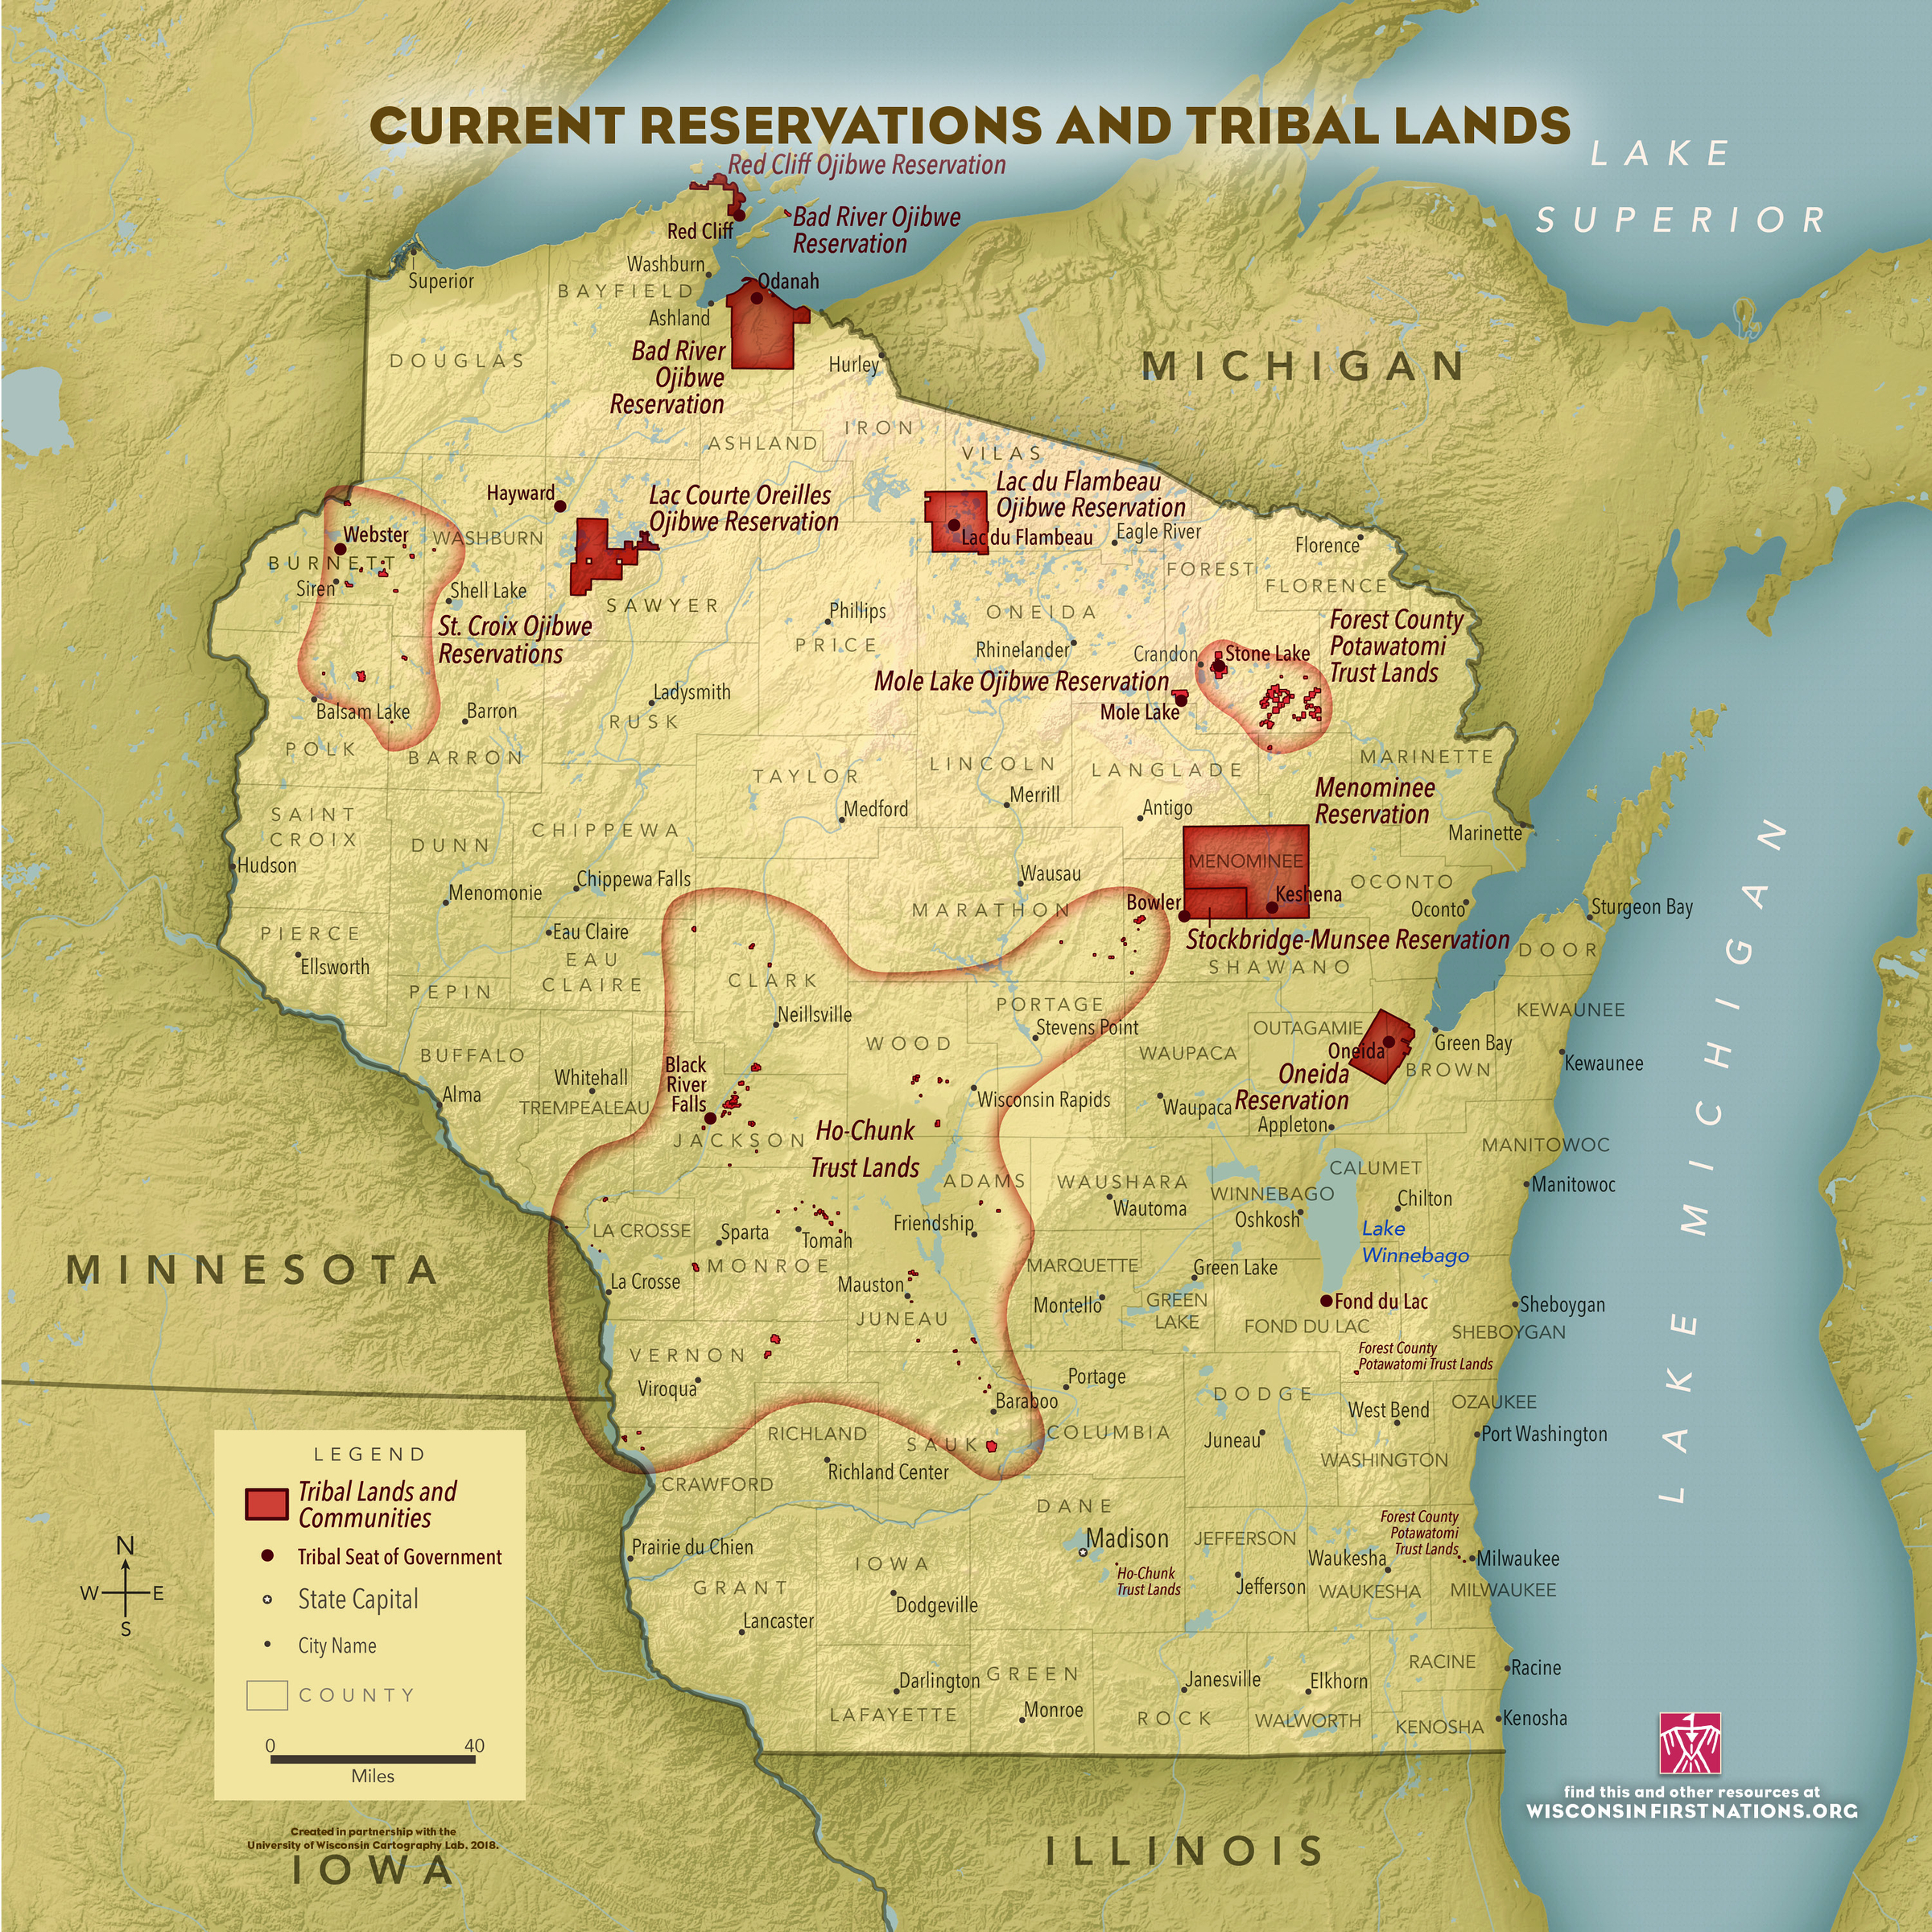 A map of the current reservations and tribal lands in Wisconsin